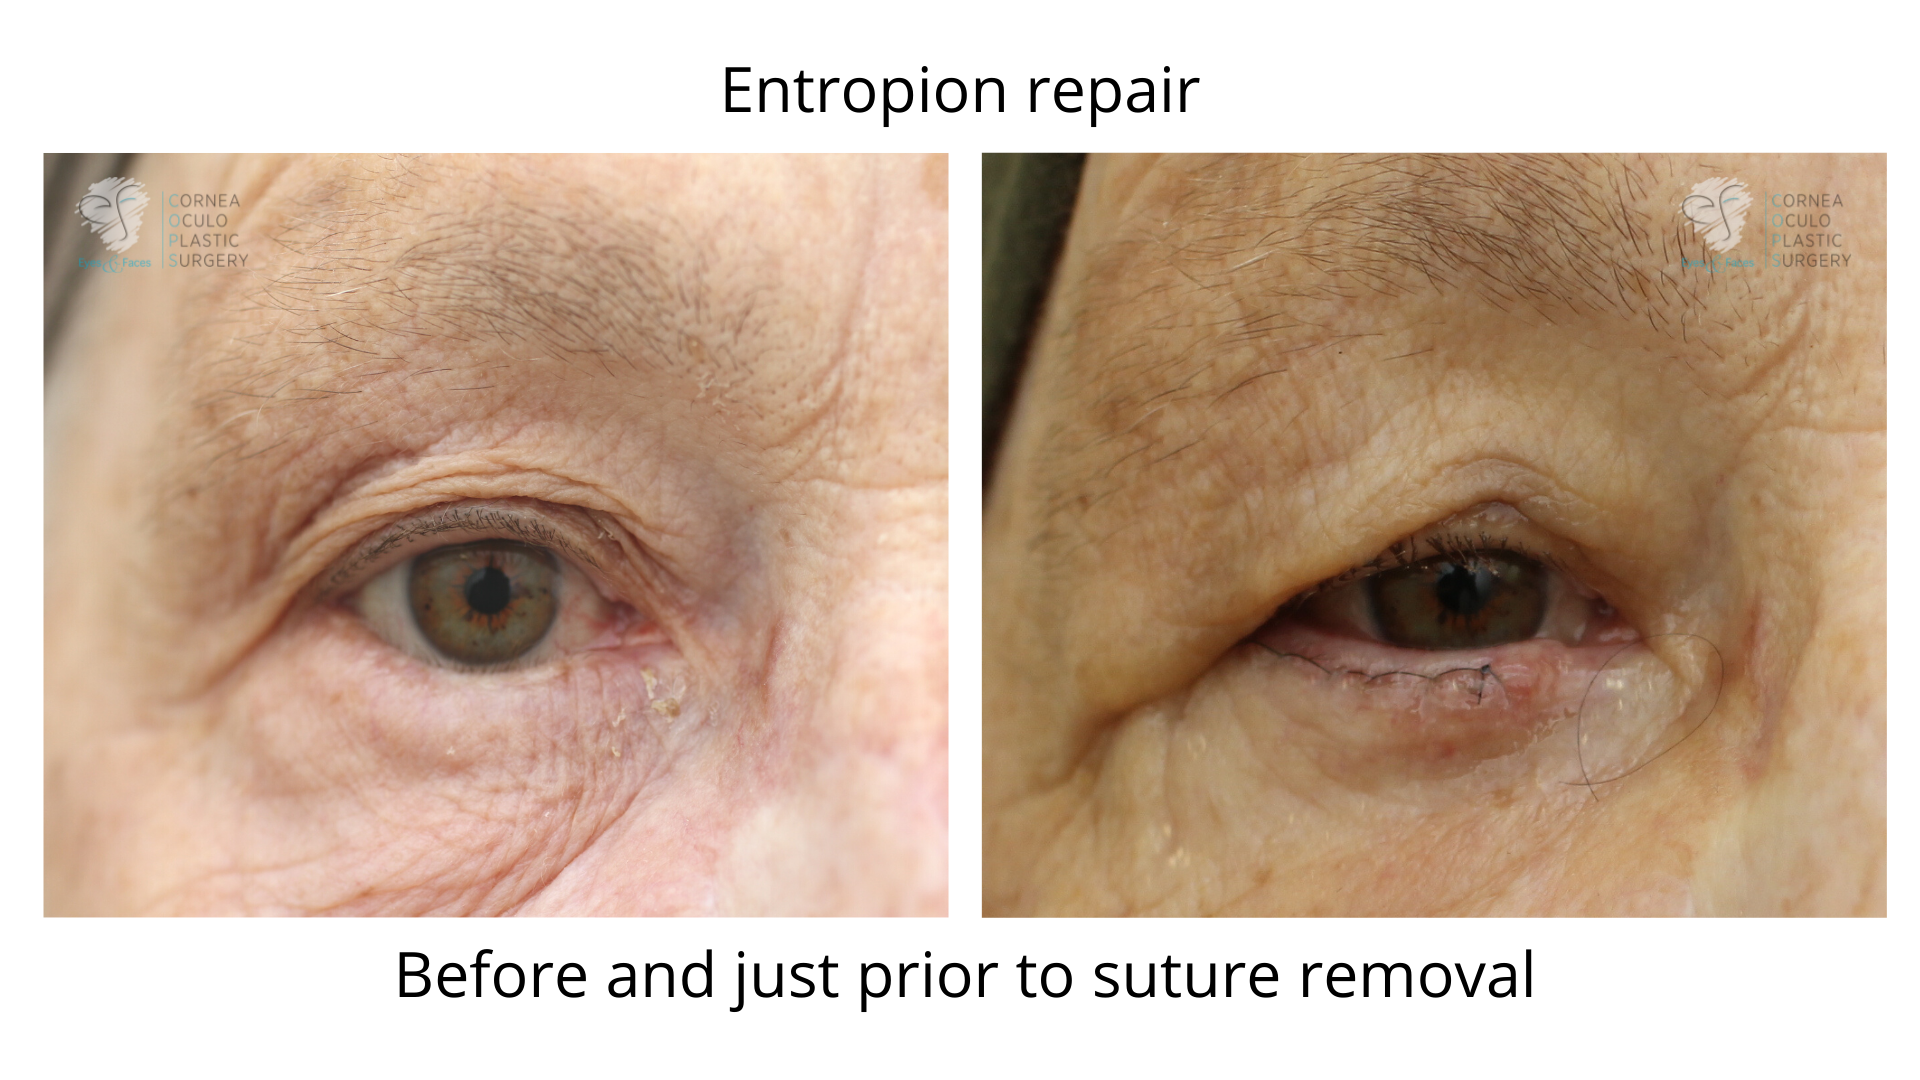 Before and after image of Entropion repair.